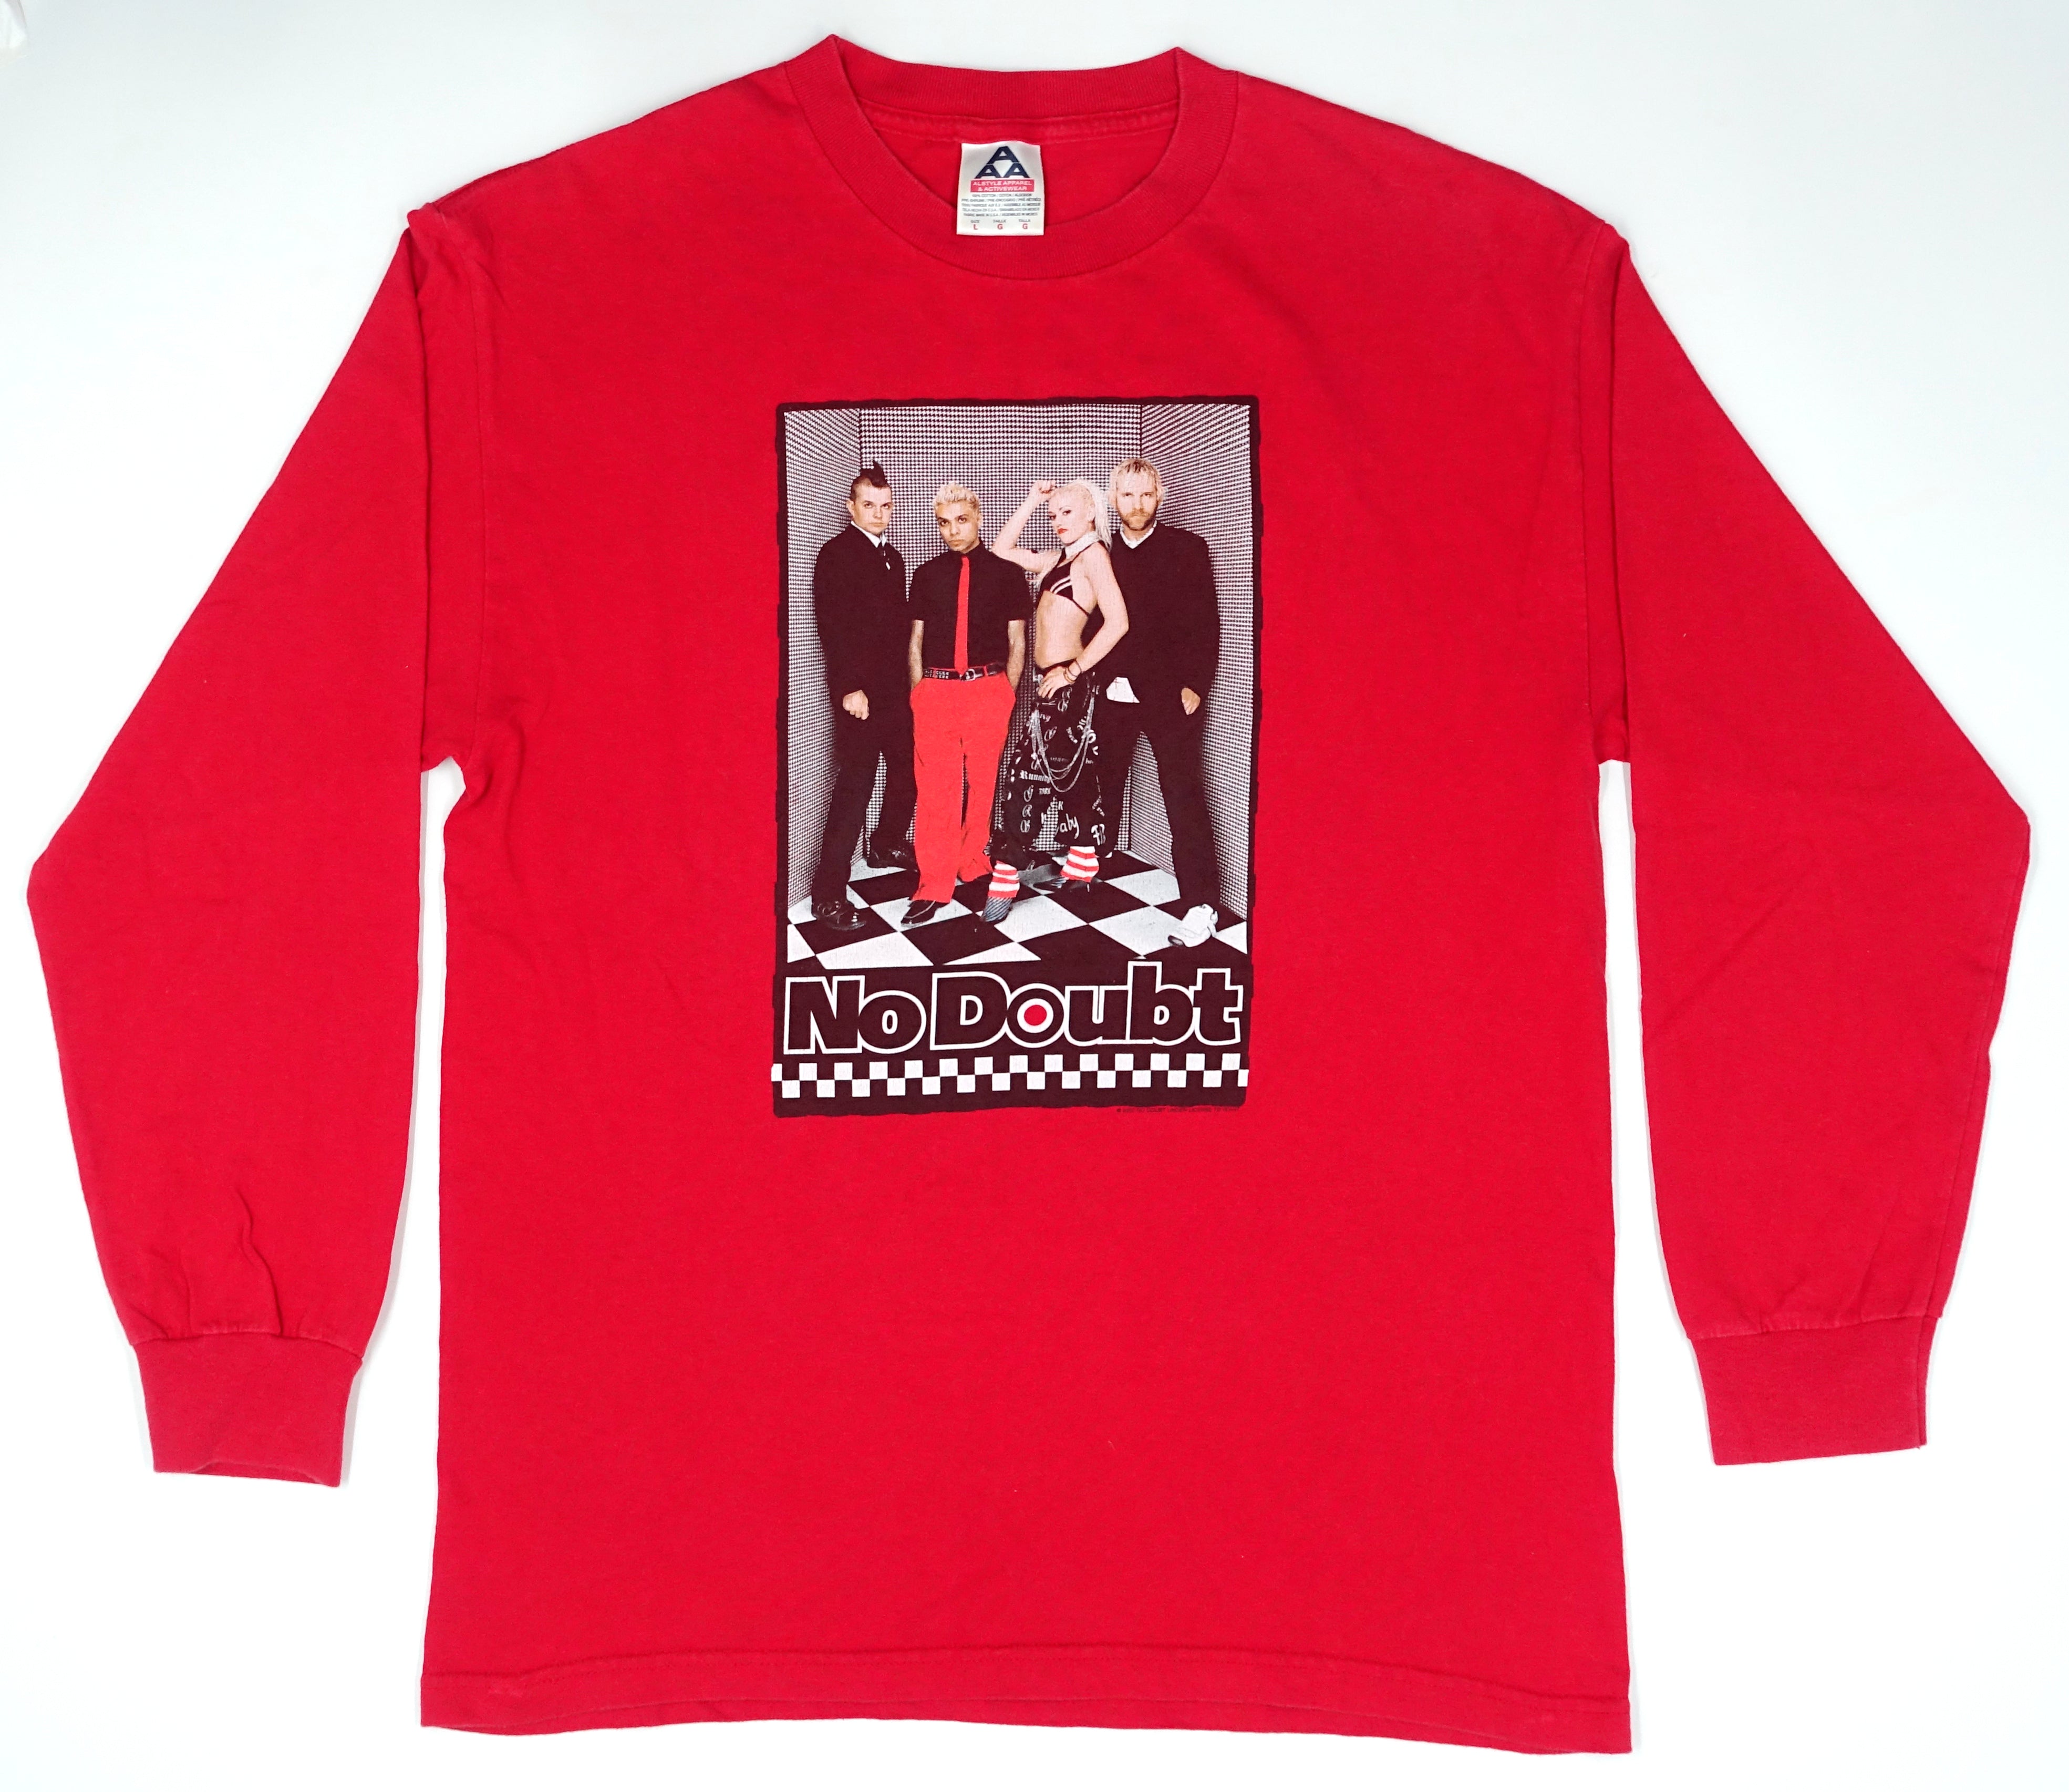 No Doubt - Band Photo Rock Steady 2002 Tour Long Sleeve Shirt Size Large